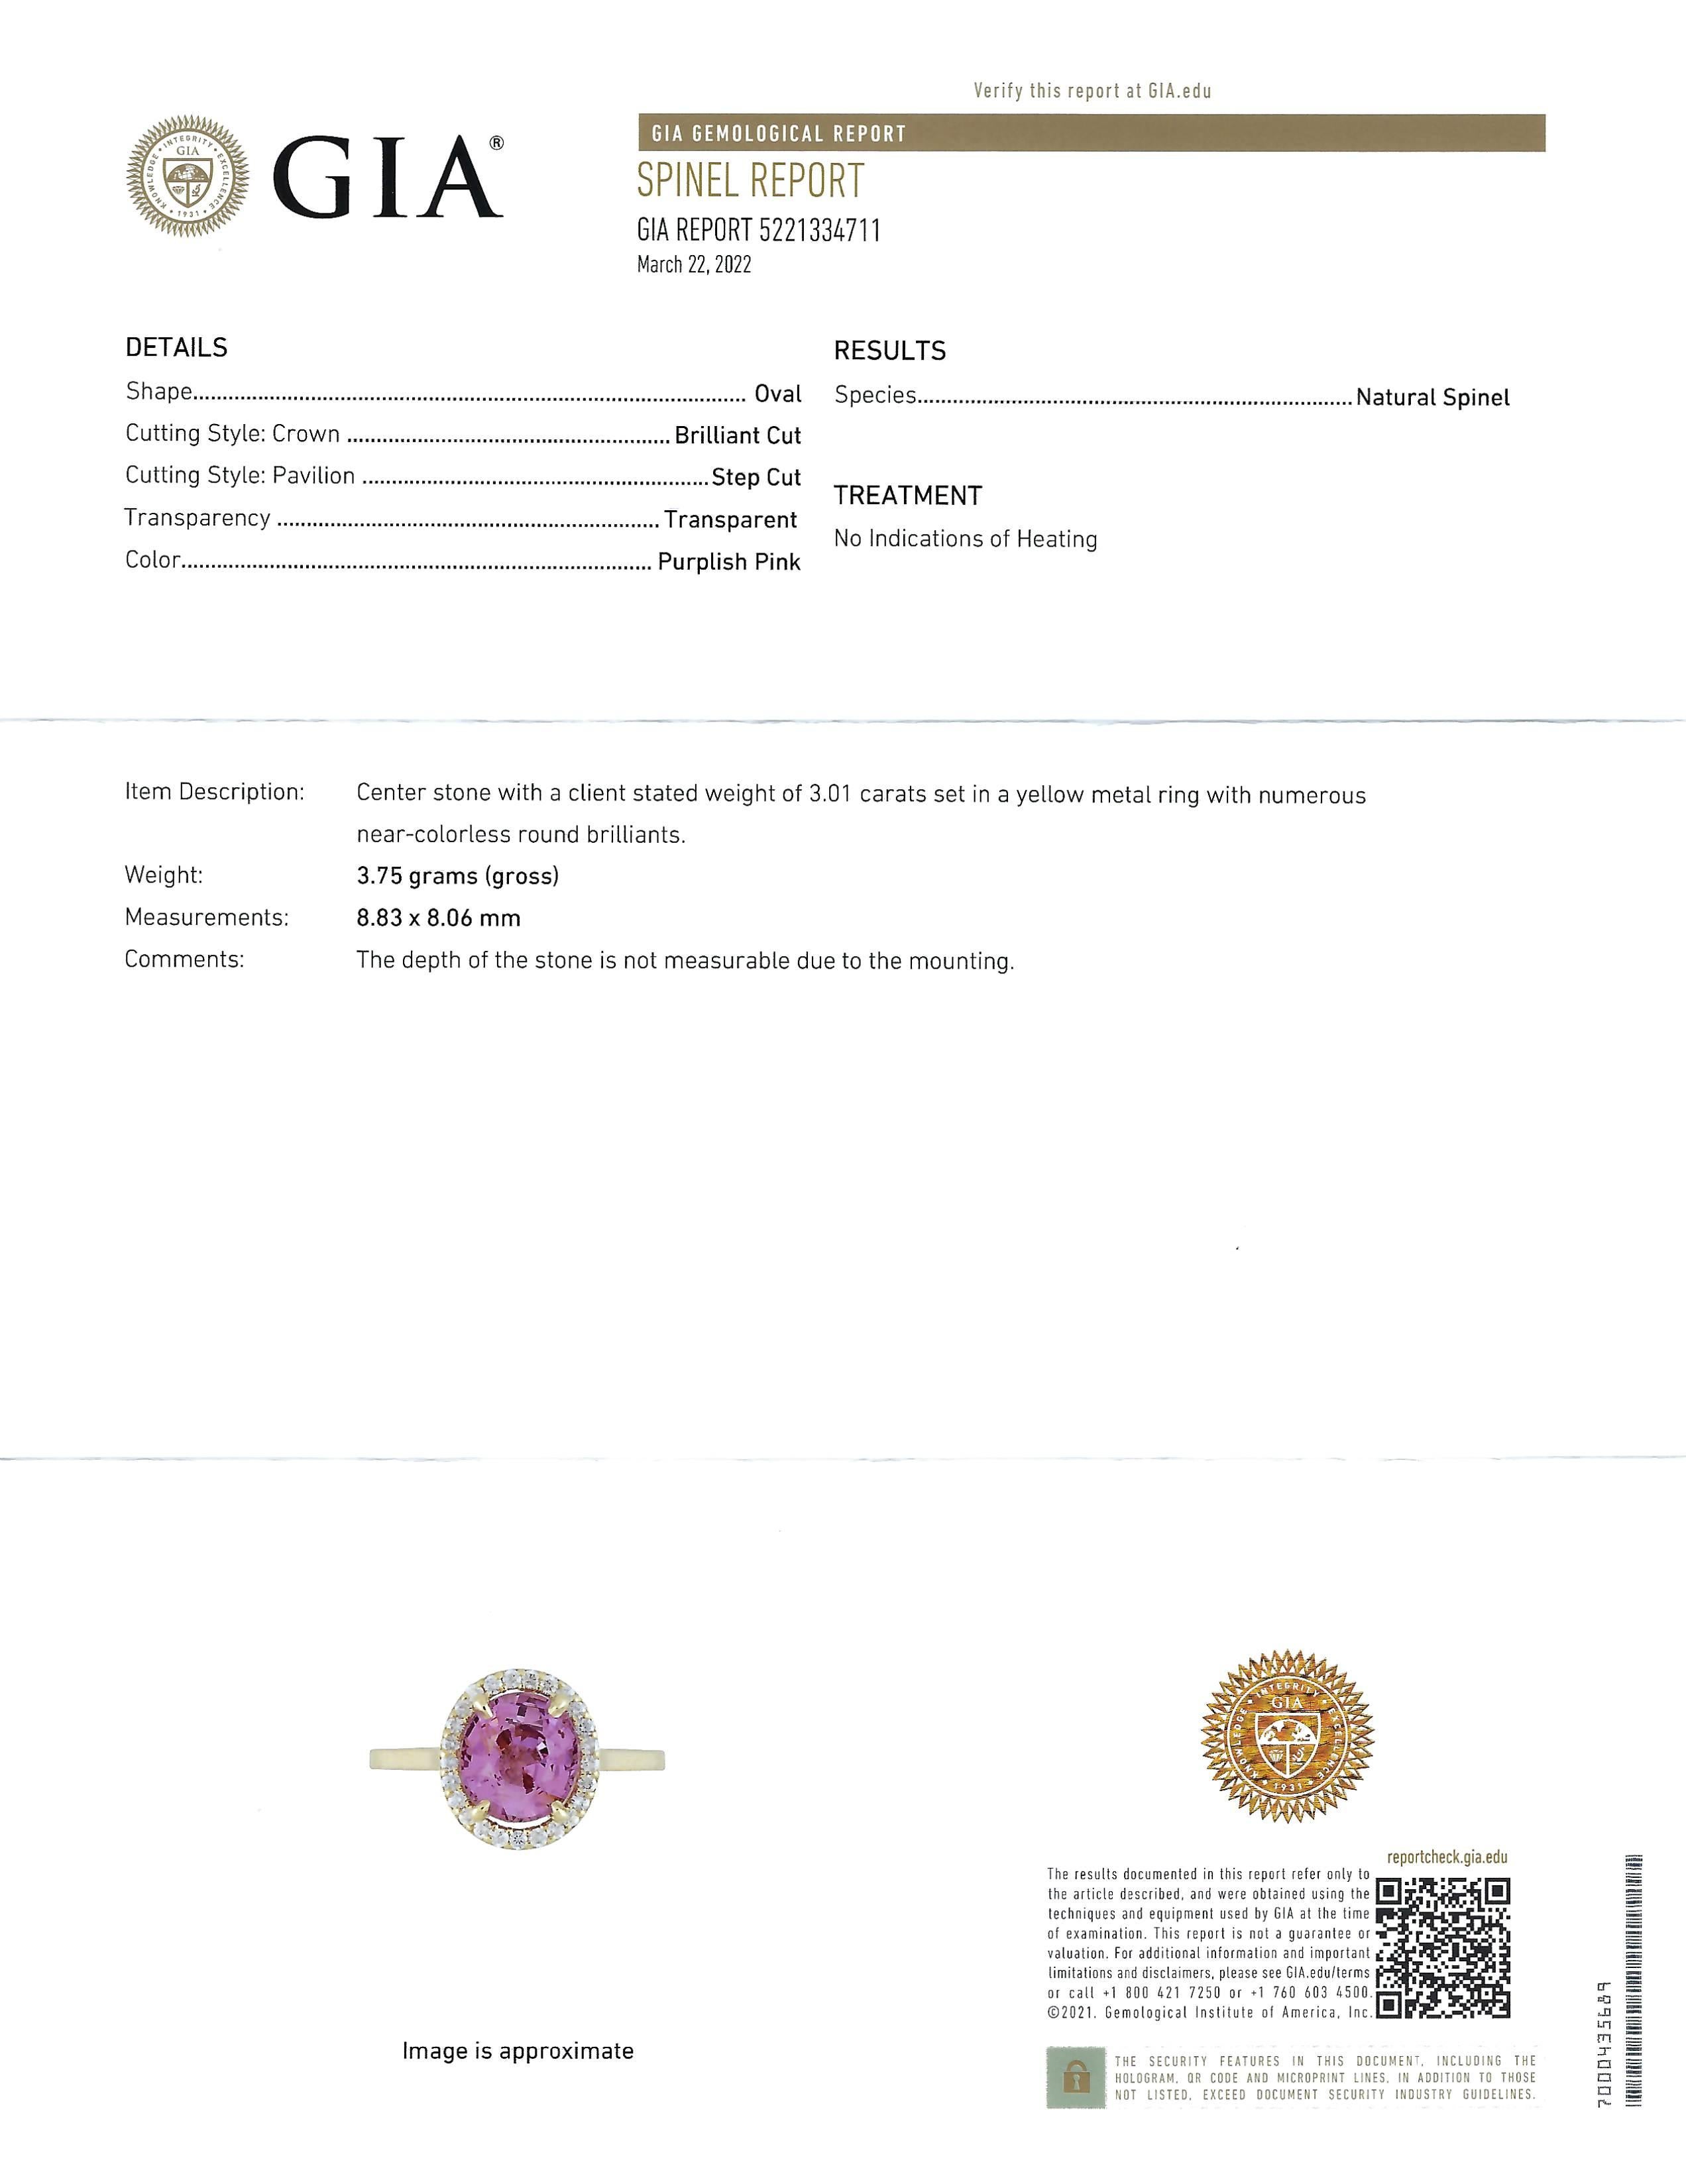 Oval Cut NEW GIA Cert Unheated Natural Oval Pink Spinel Diamond Ring in 14K Yellow Gold For Sale